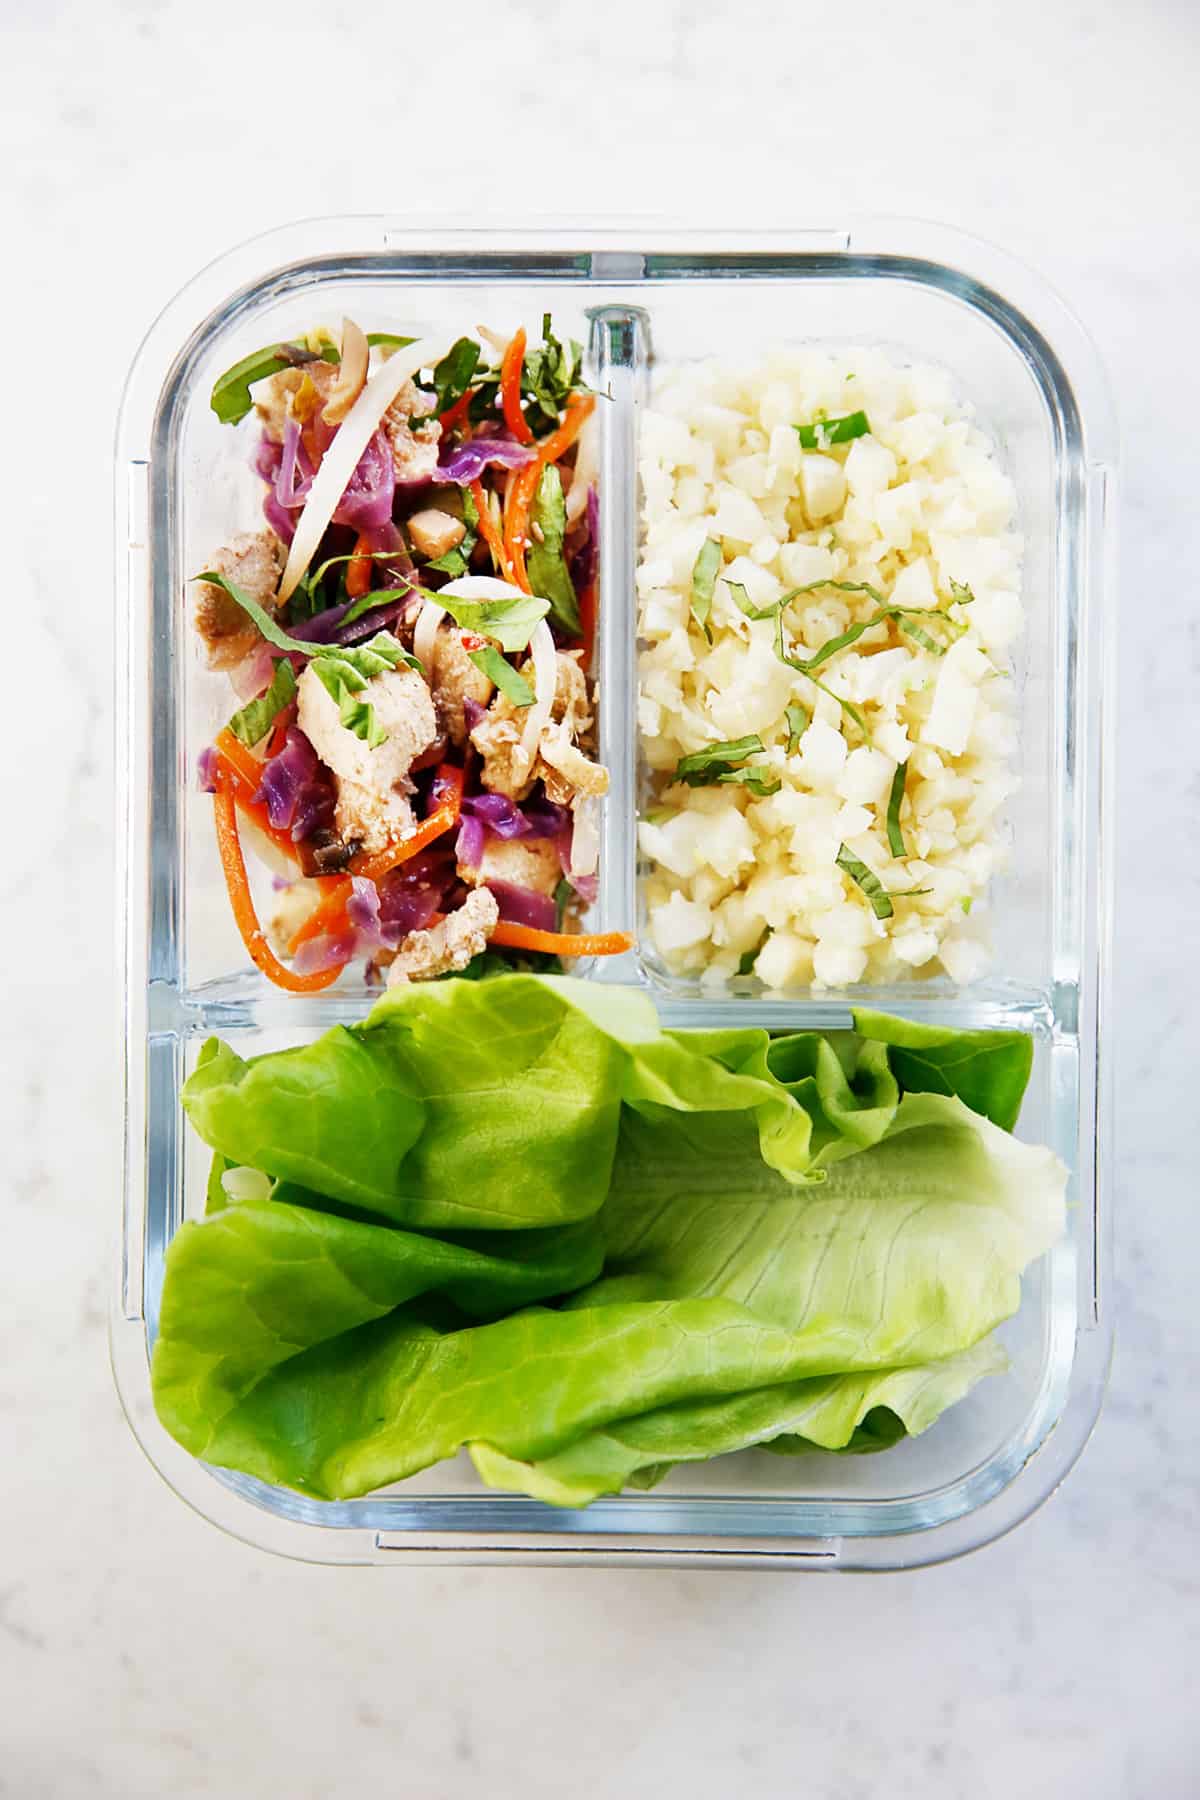 Thai Chicken Lettuce Wraps deconstructed in a meal prep container.